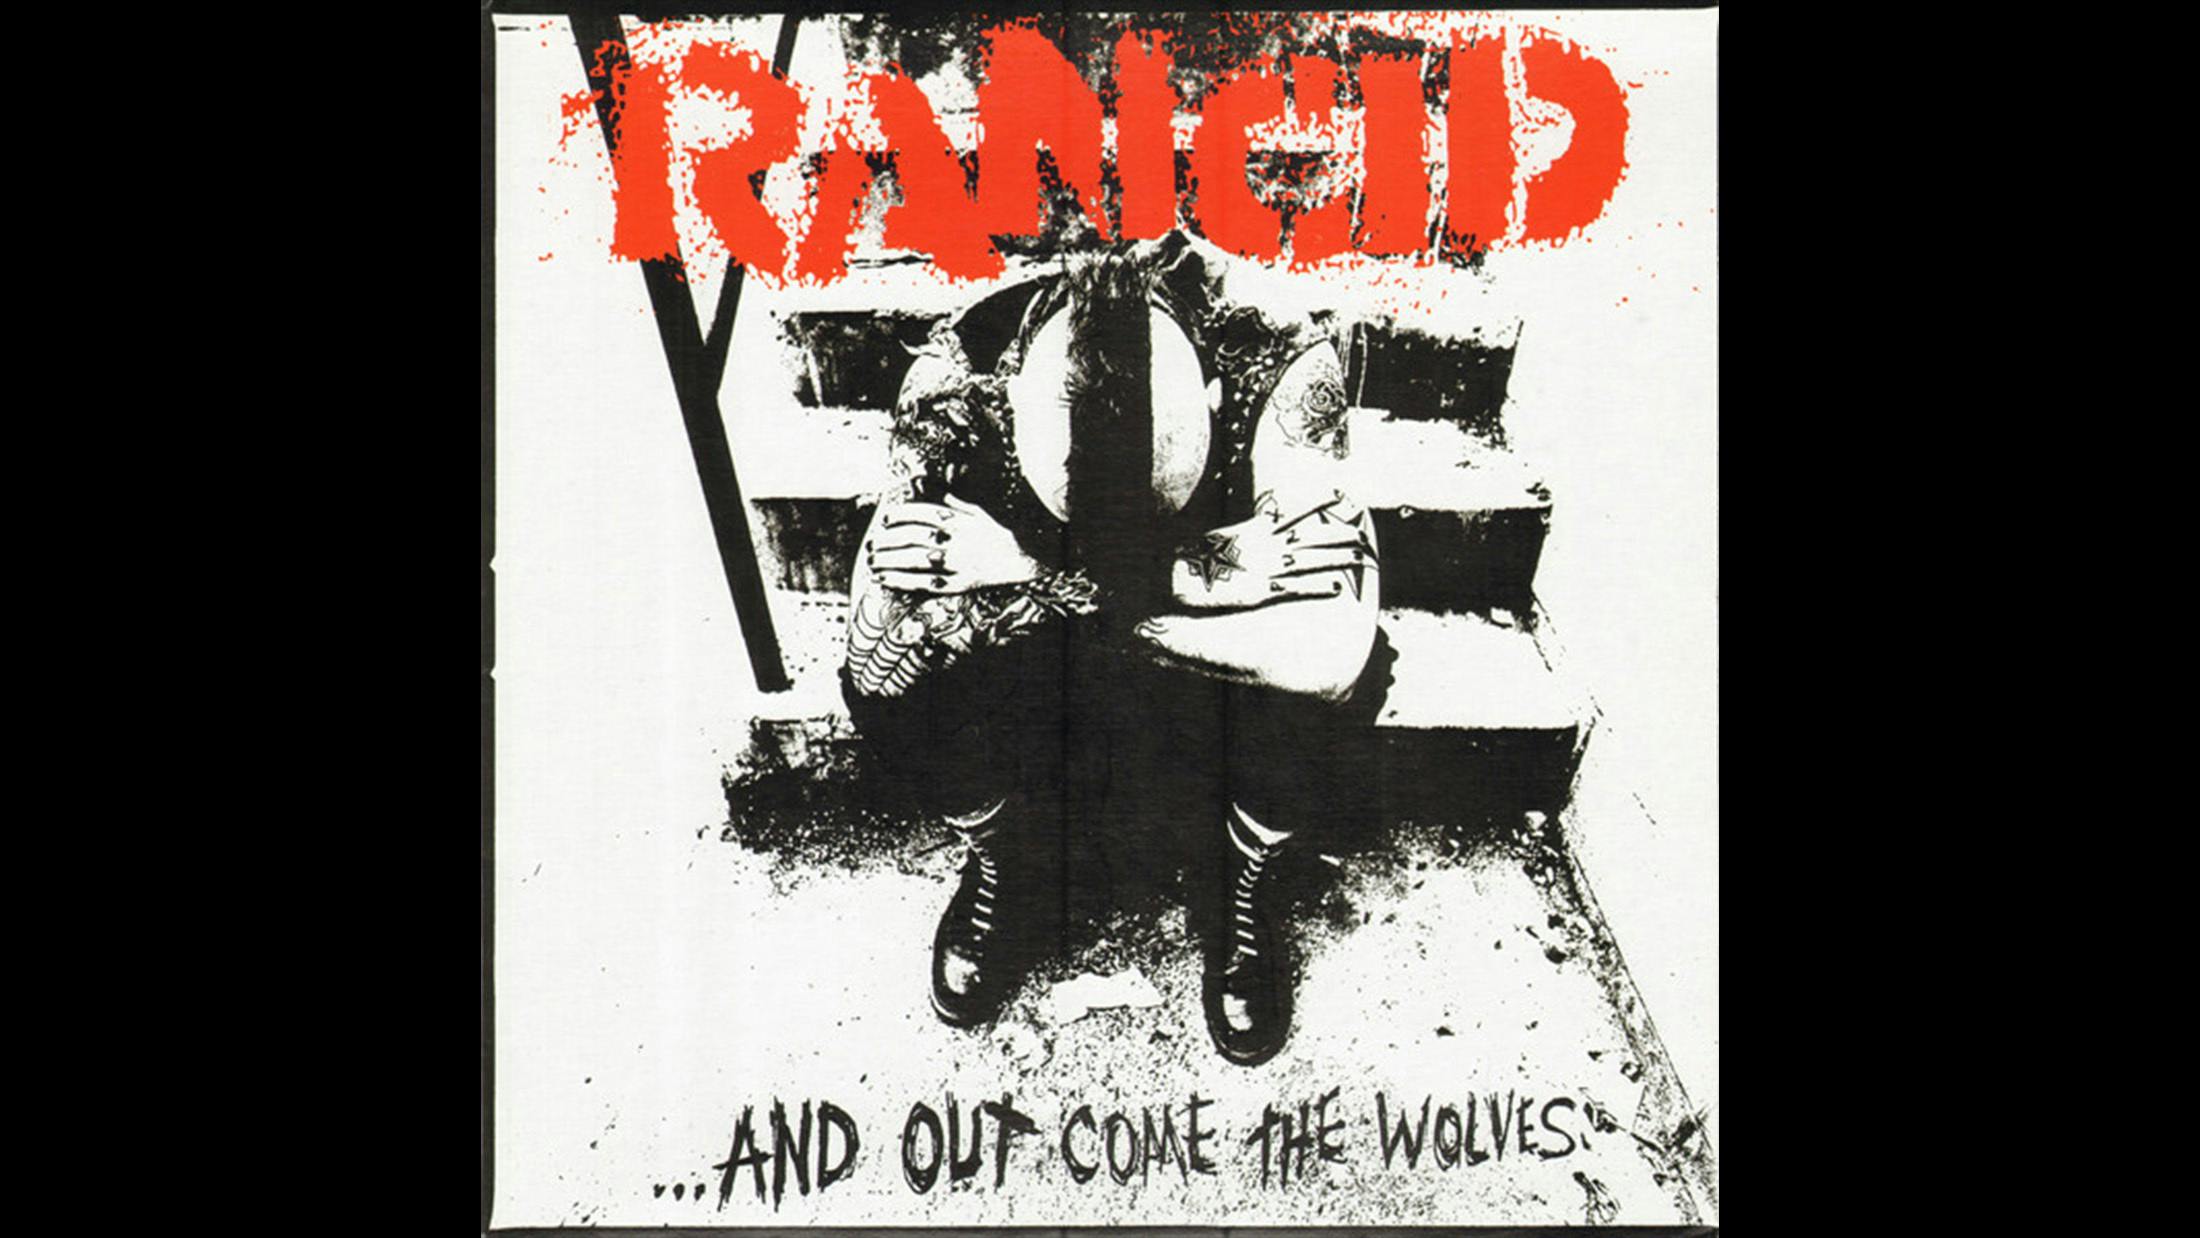 Not to be outdone by the standard bearing efforts of their peers, Berkley punks Rancid put their best boots forward on this near-perfect third album. Taking their old school ska influences and writing about people, places and things they knew and loved, the results bear a timeless and tune-filled charm. Rumour has it that Madonna even tried to persuade the band to sign with her label, Maverick, by sending guitarist/vocalist Tim Armstrong nudes. They famously declined all major label advances though, losing out on a lucrative payday in the process. Punk. Fucking. Rock.